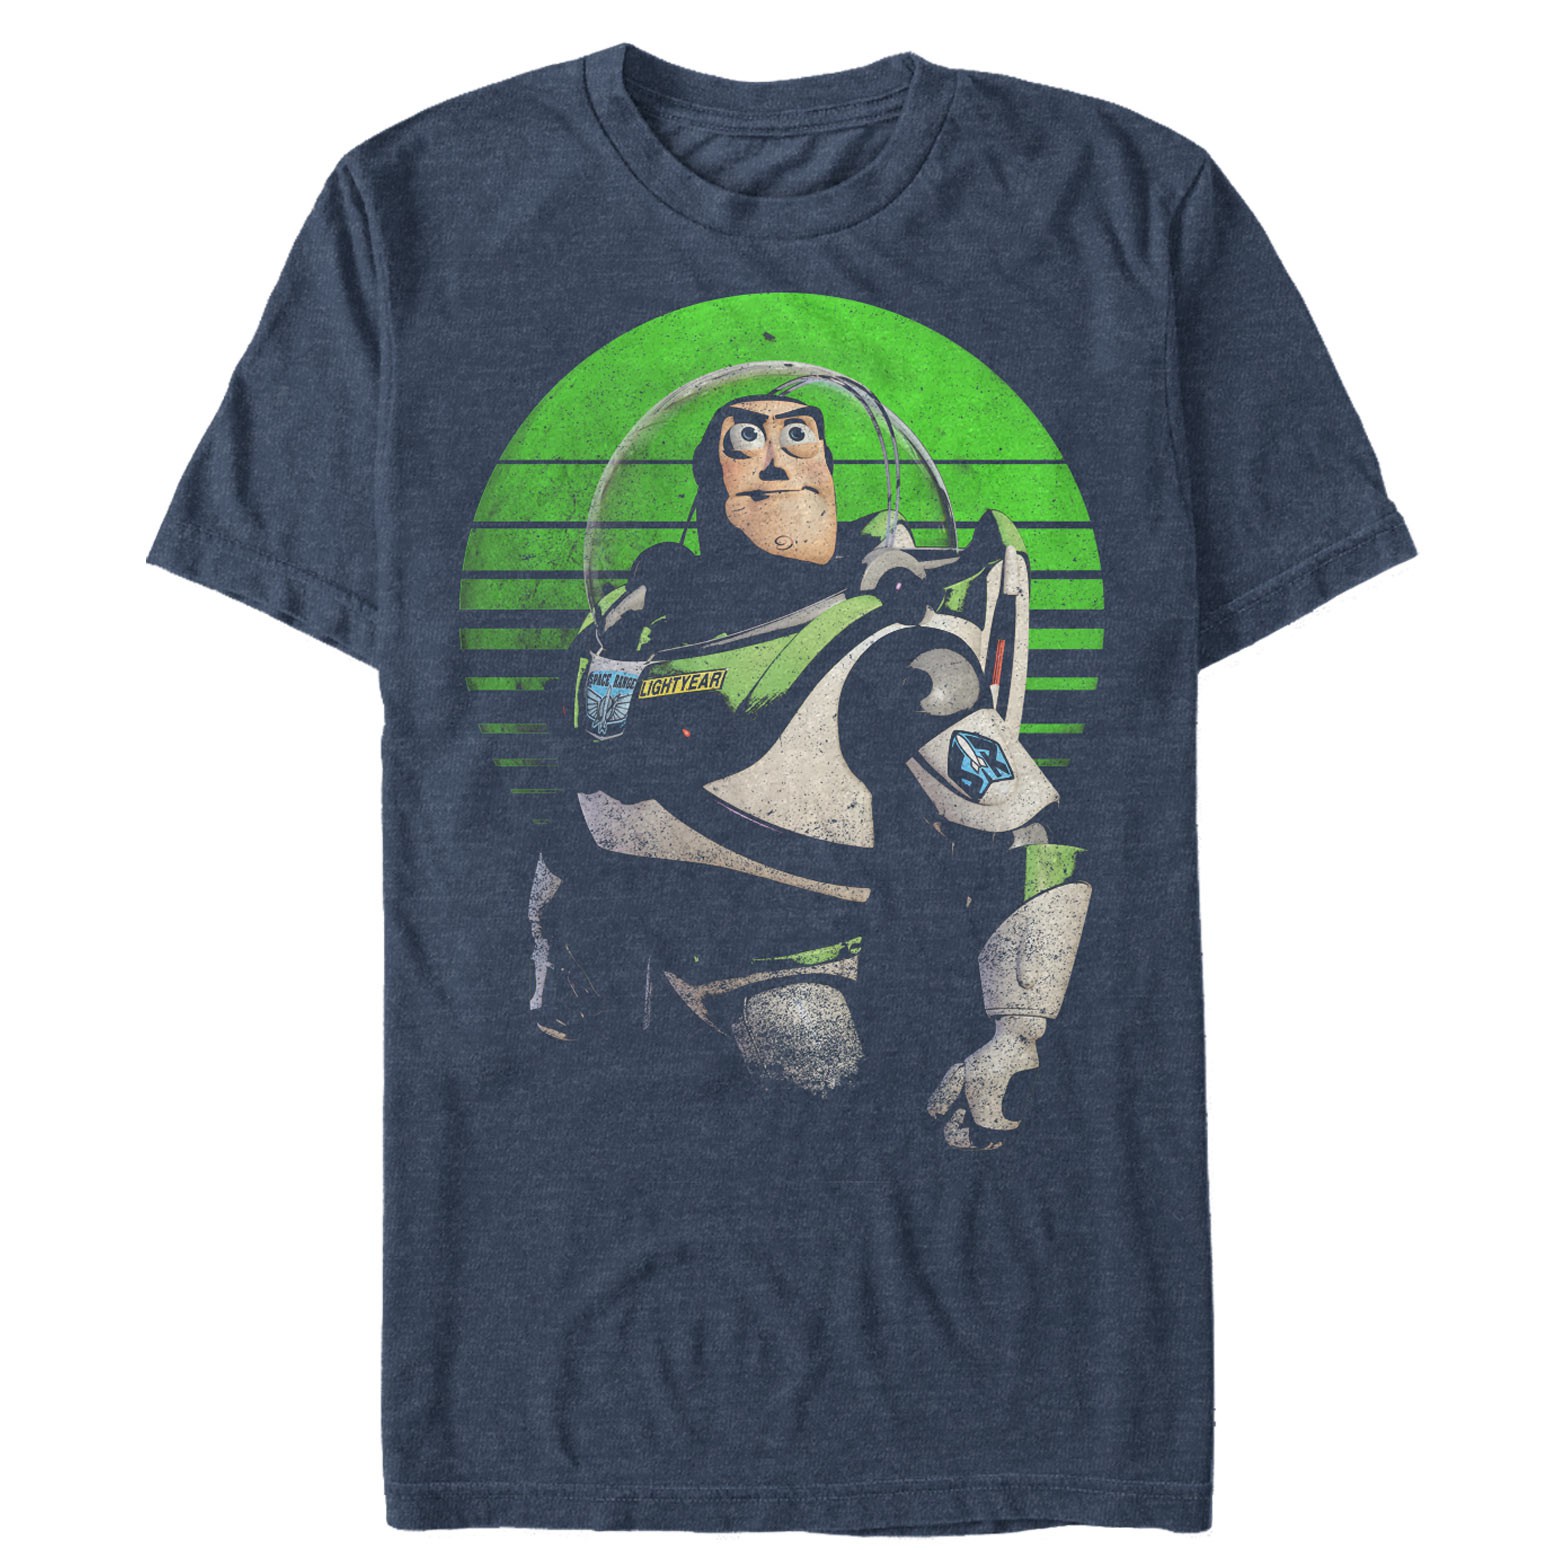 Toy Story Women's Heather Blue Distressed Buzz Lightyear T-Shirt-Small - image 1 of 1